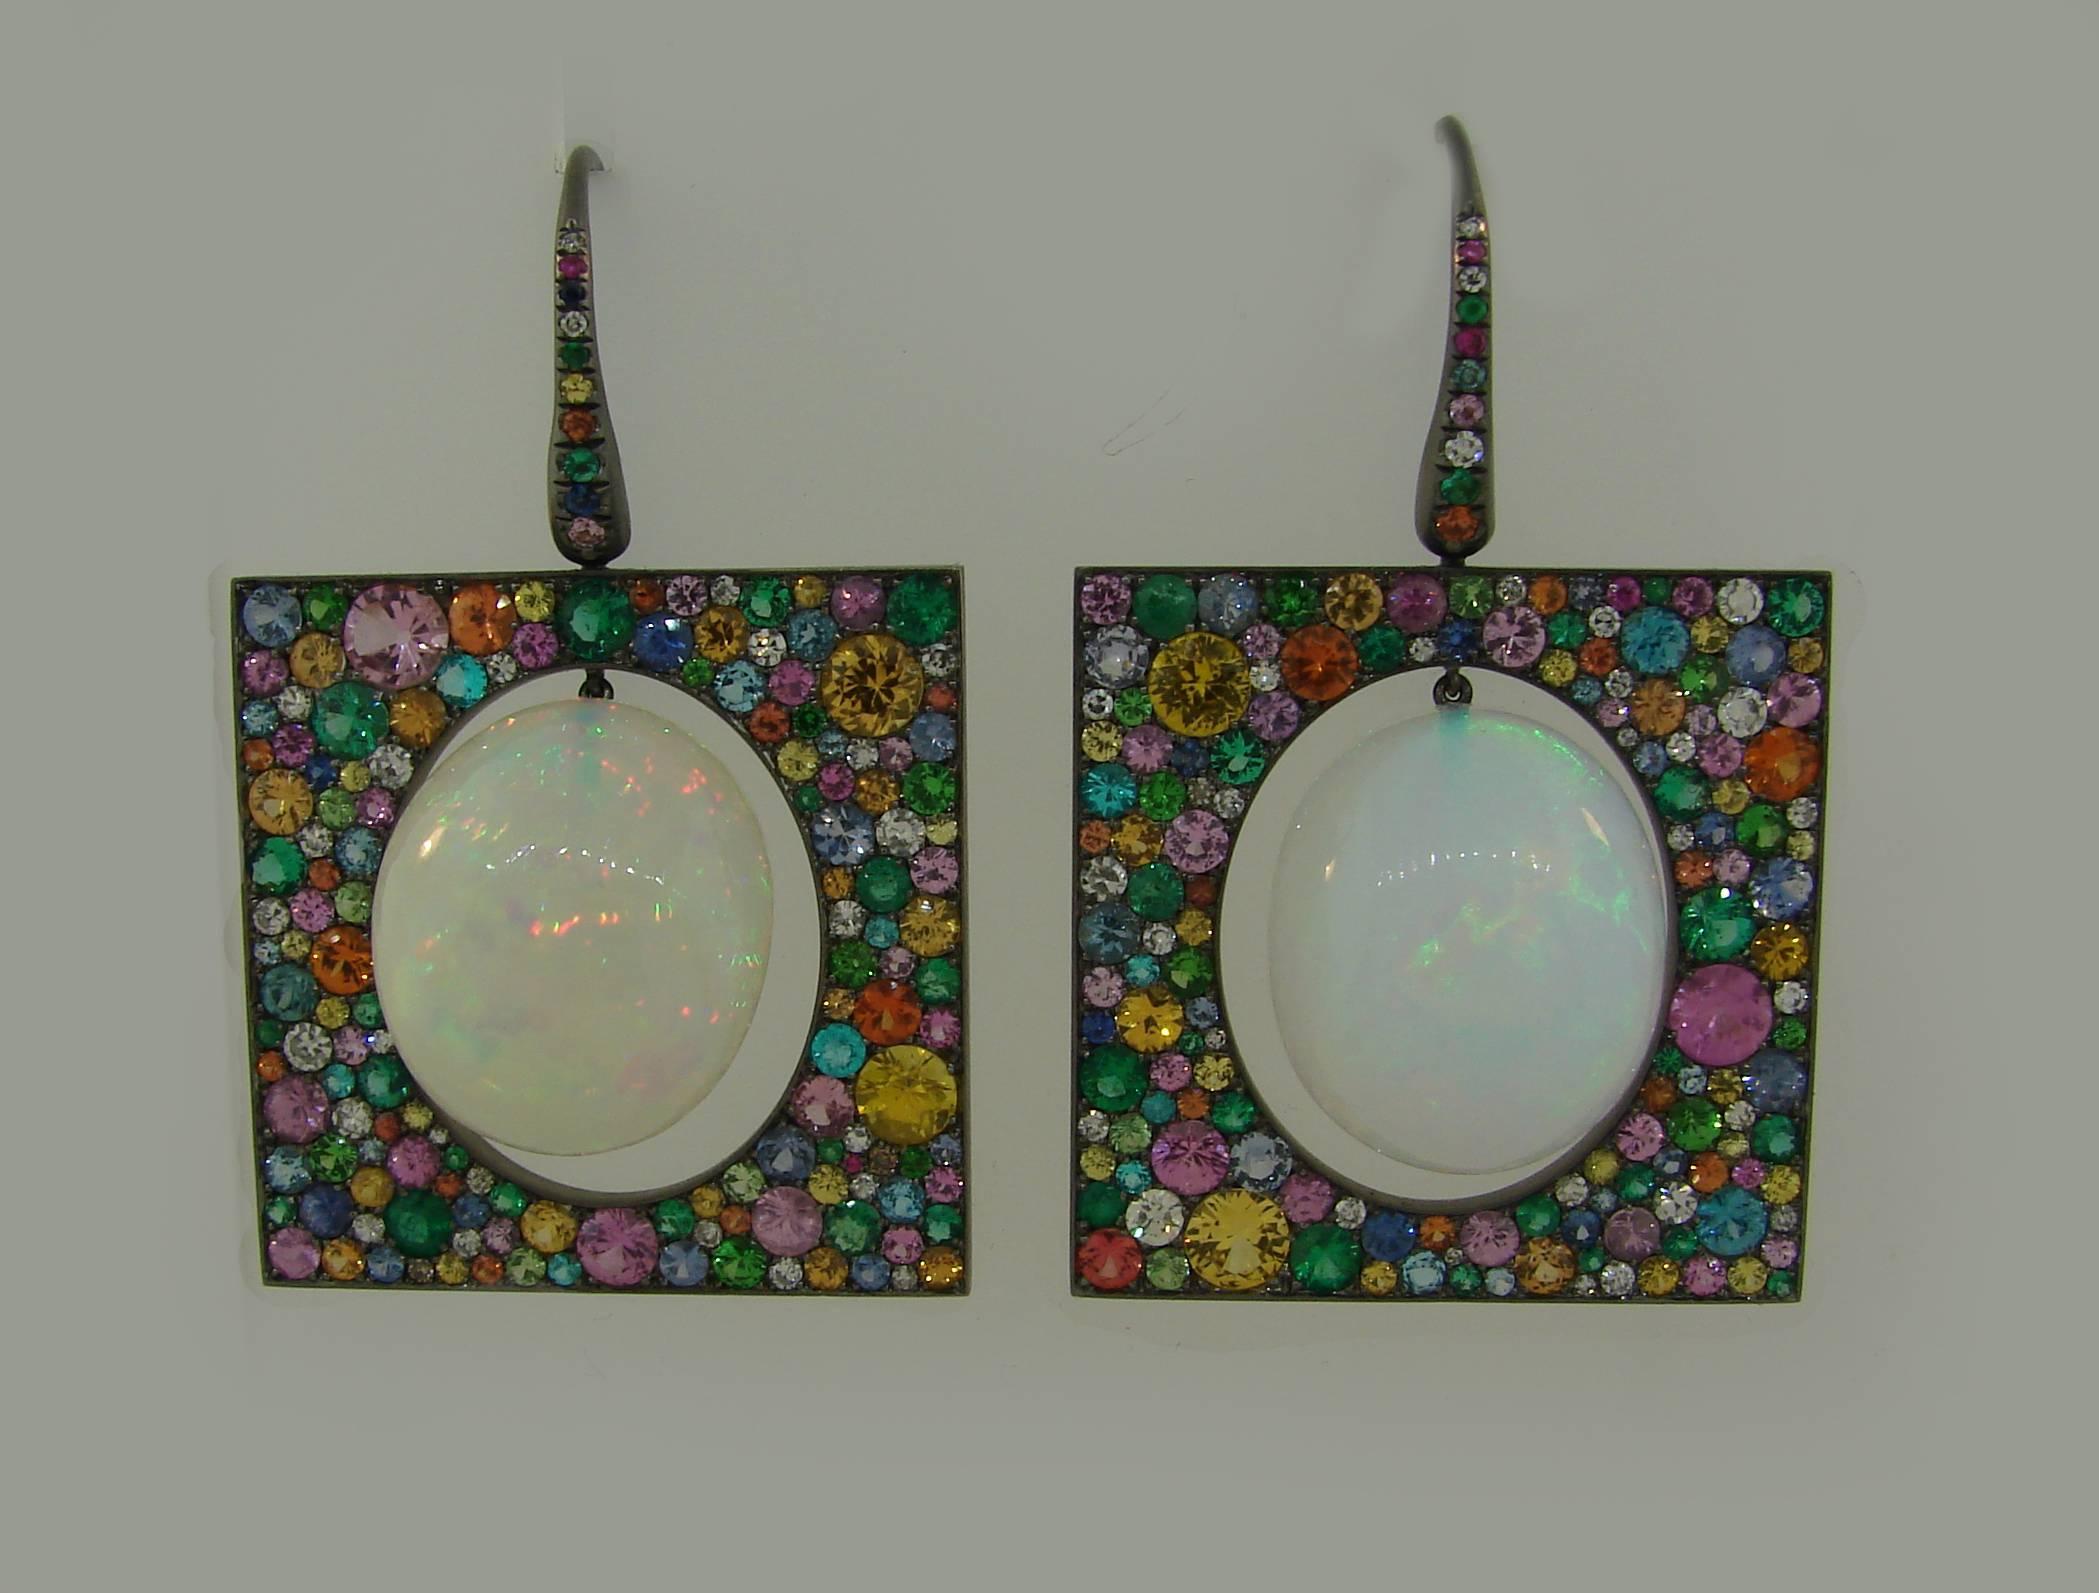 Colorful and unusual earrings created by a modern Greek designer Theodoros.  Stylish, different and wearable, the earrings are a great addition to your jewelry collection.
Made of 18 karat blackened gold, the earrings feature two oval opals framed